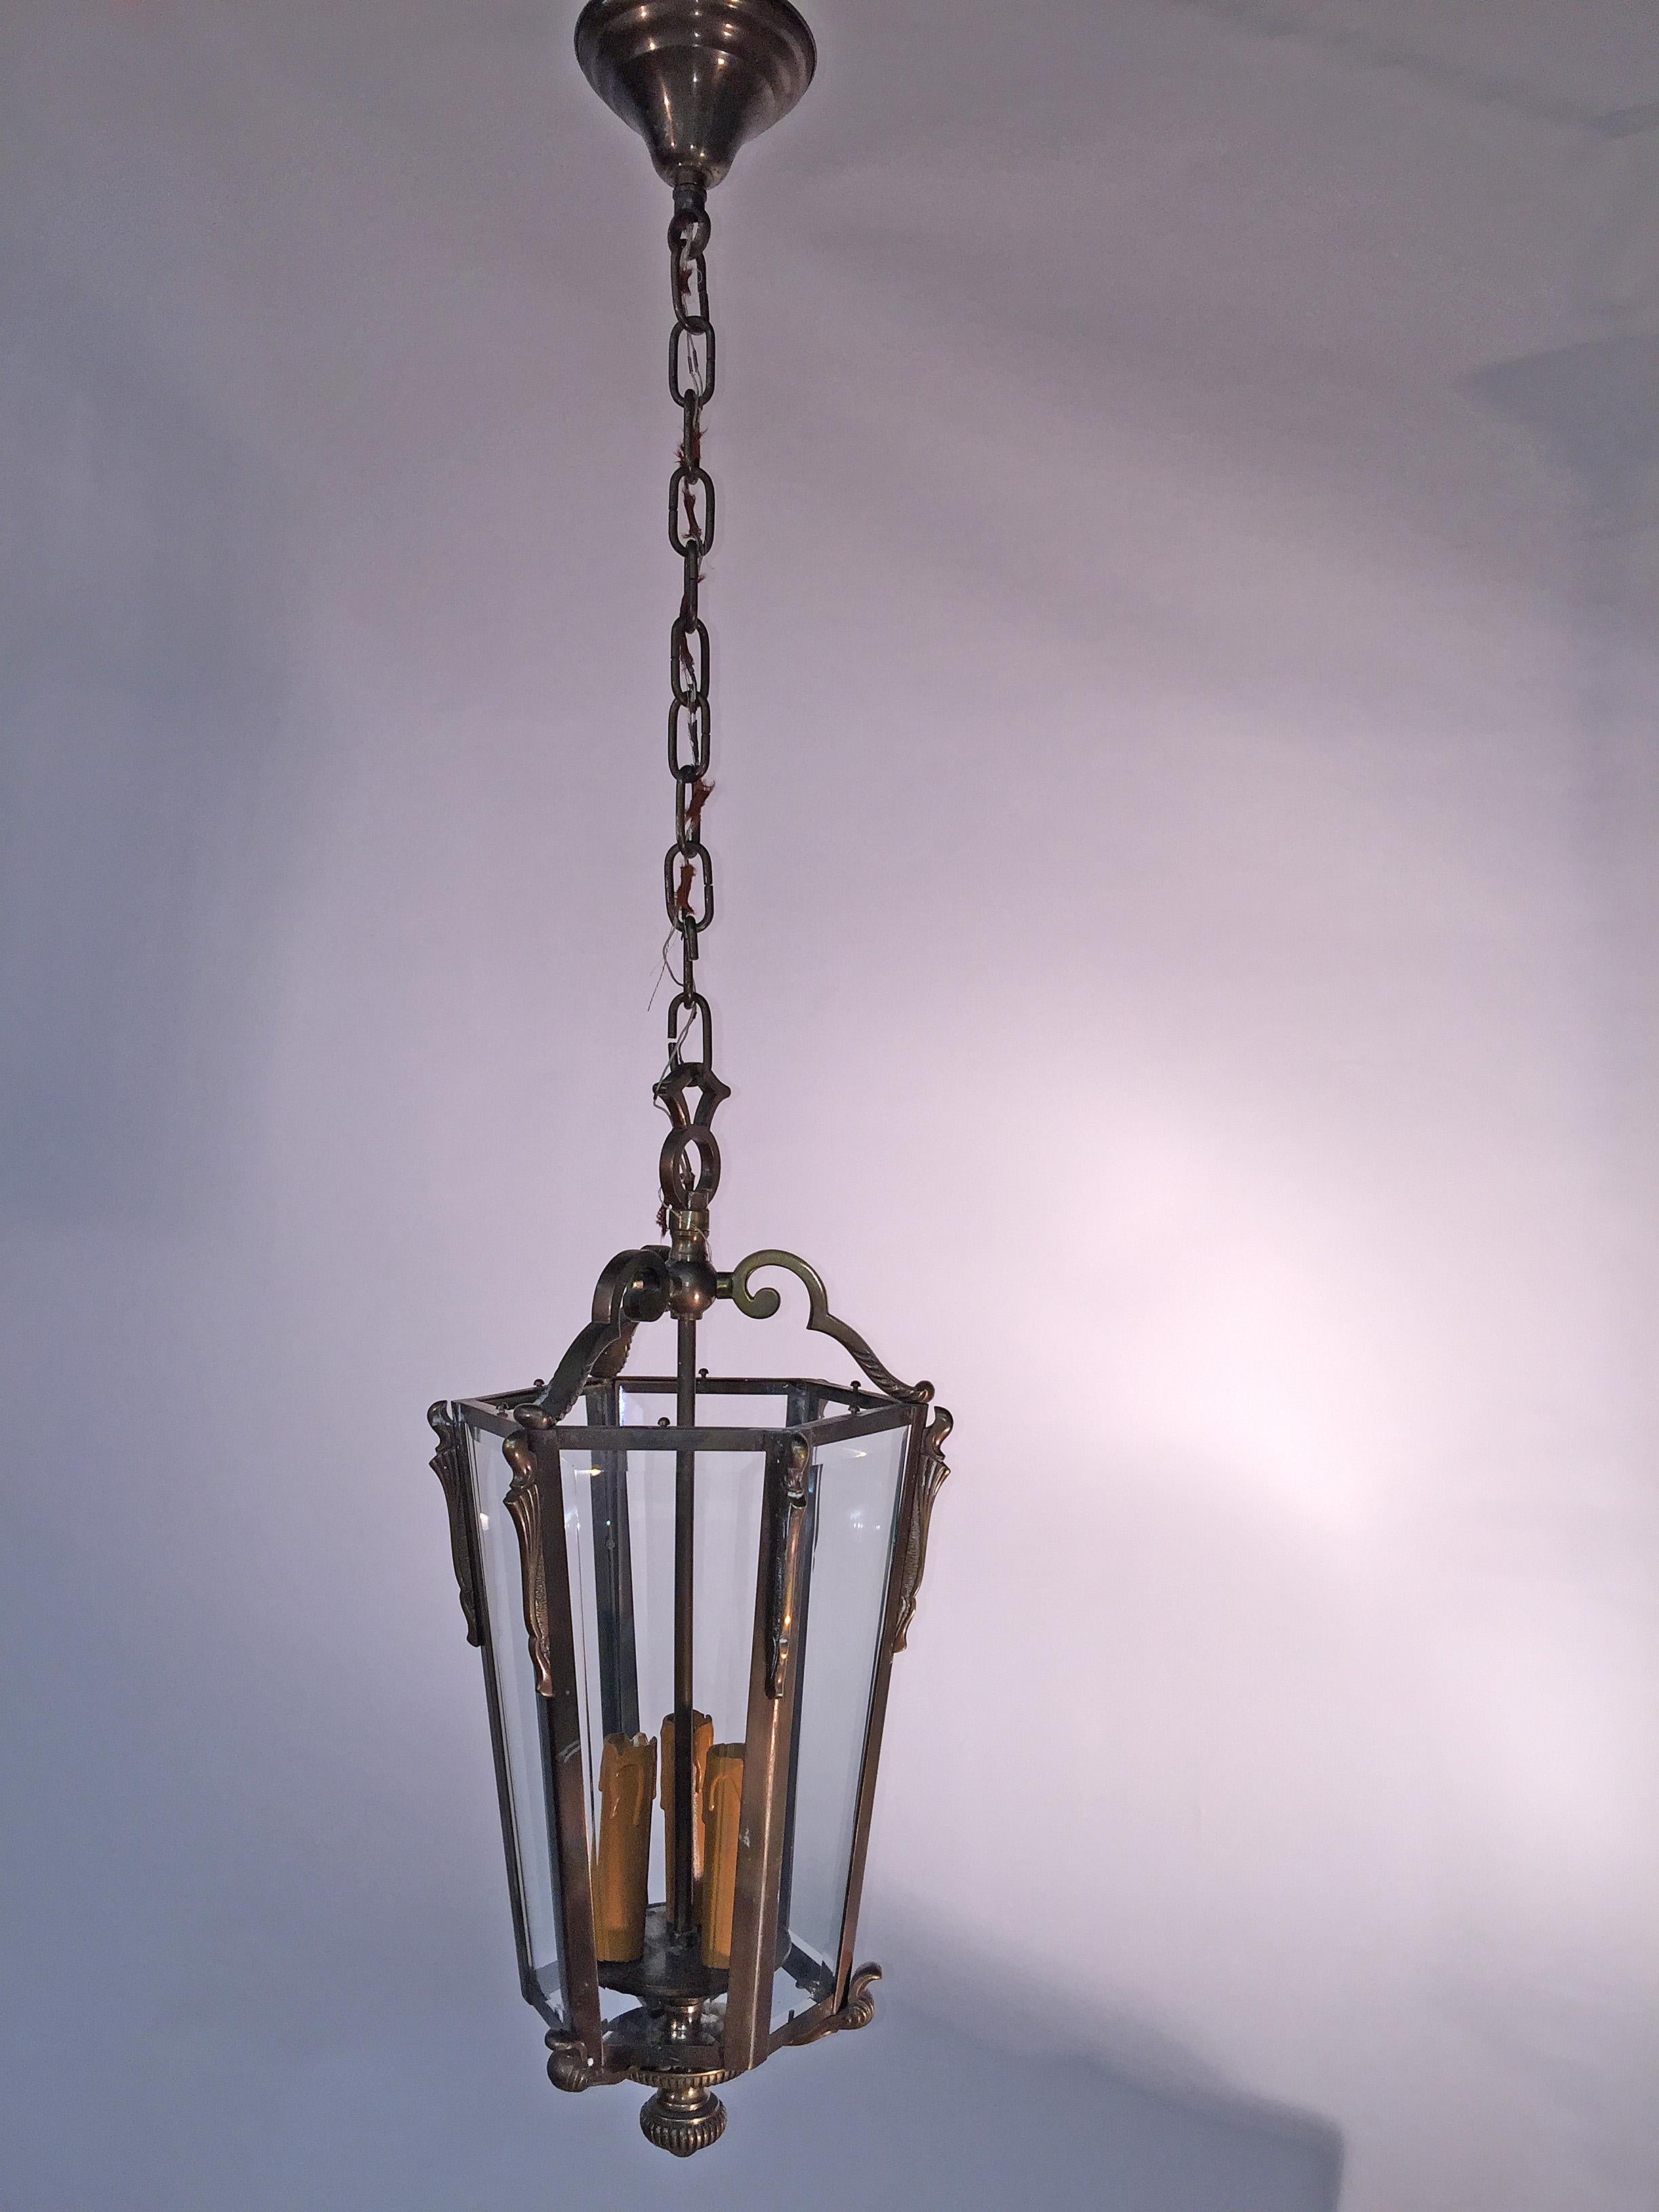 French bronze Louis XVI style hanging lantern, circa 1950
beveled glass.
hight with chain : 110 cm